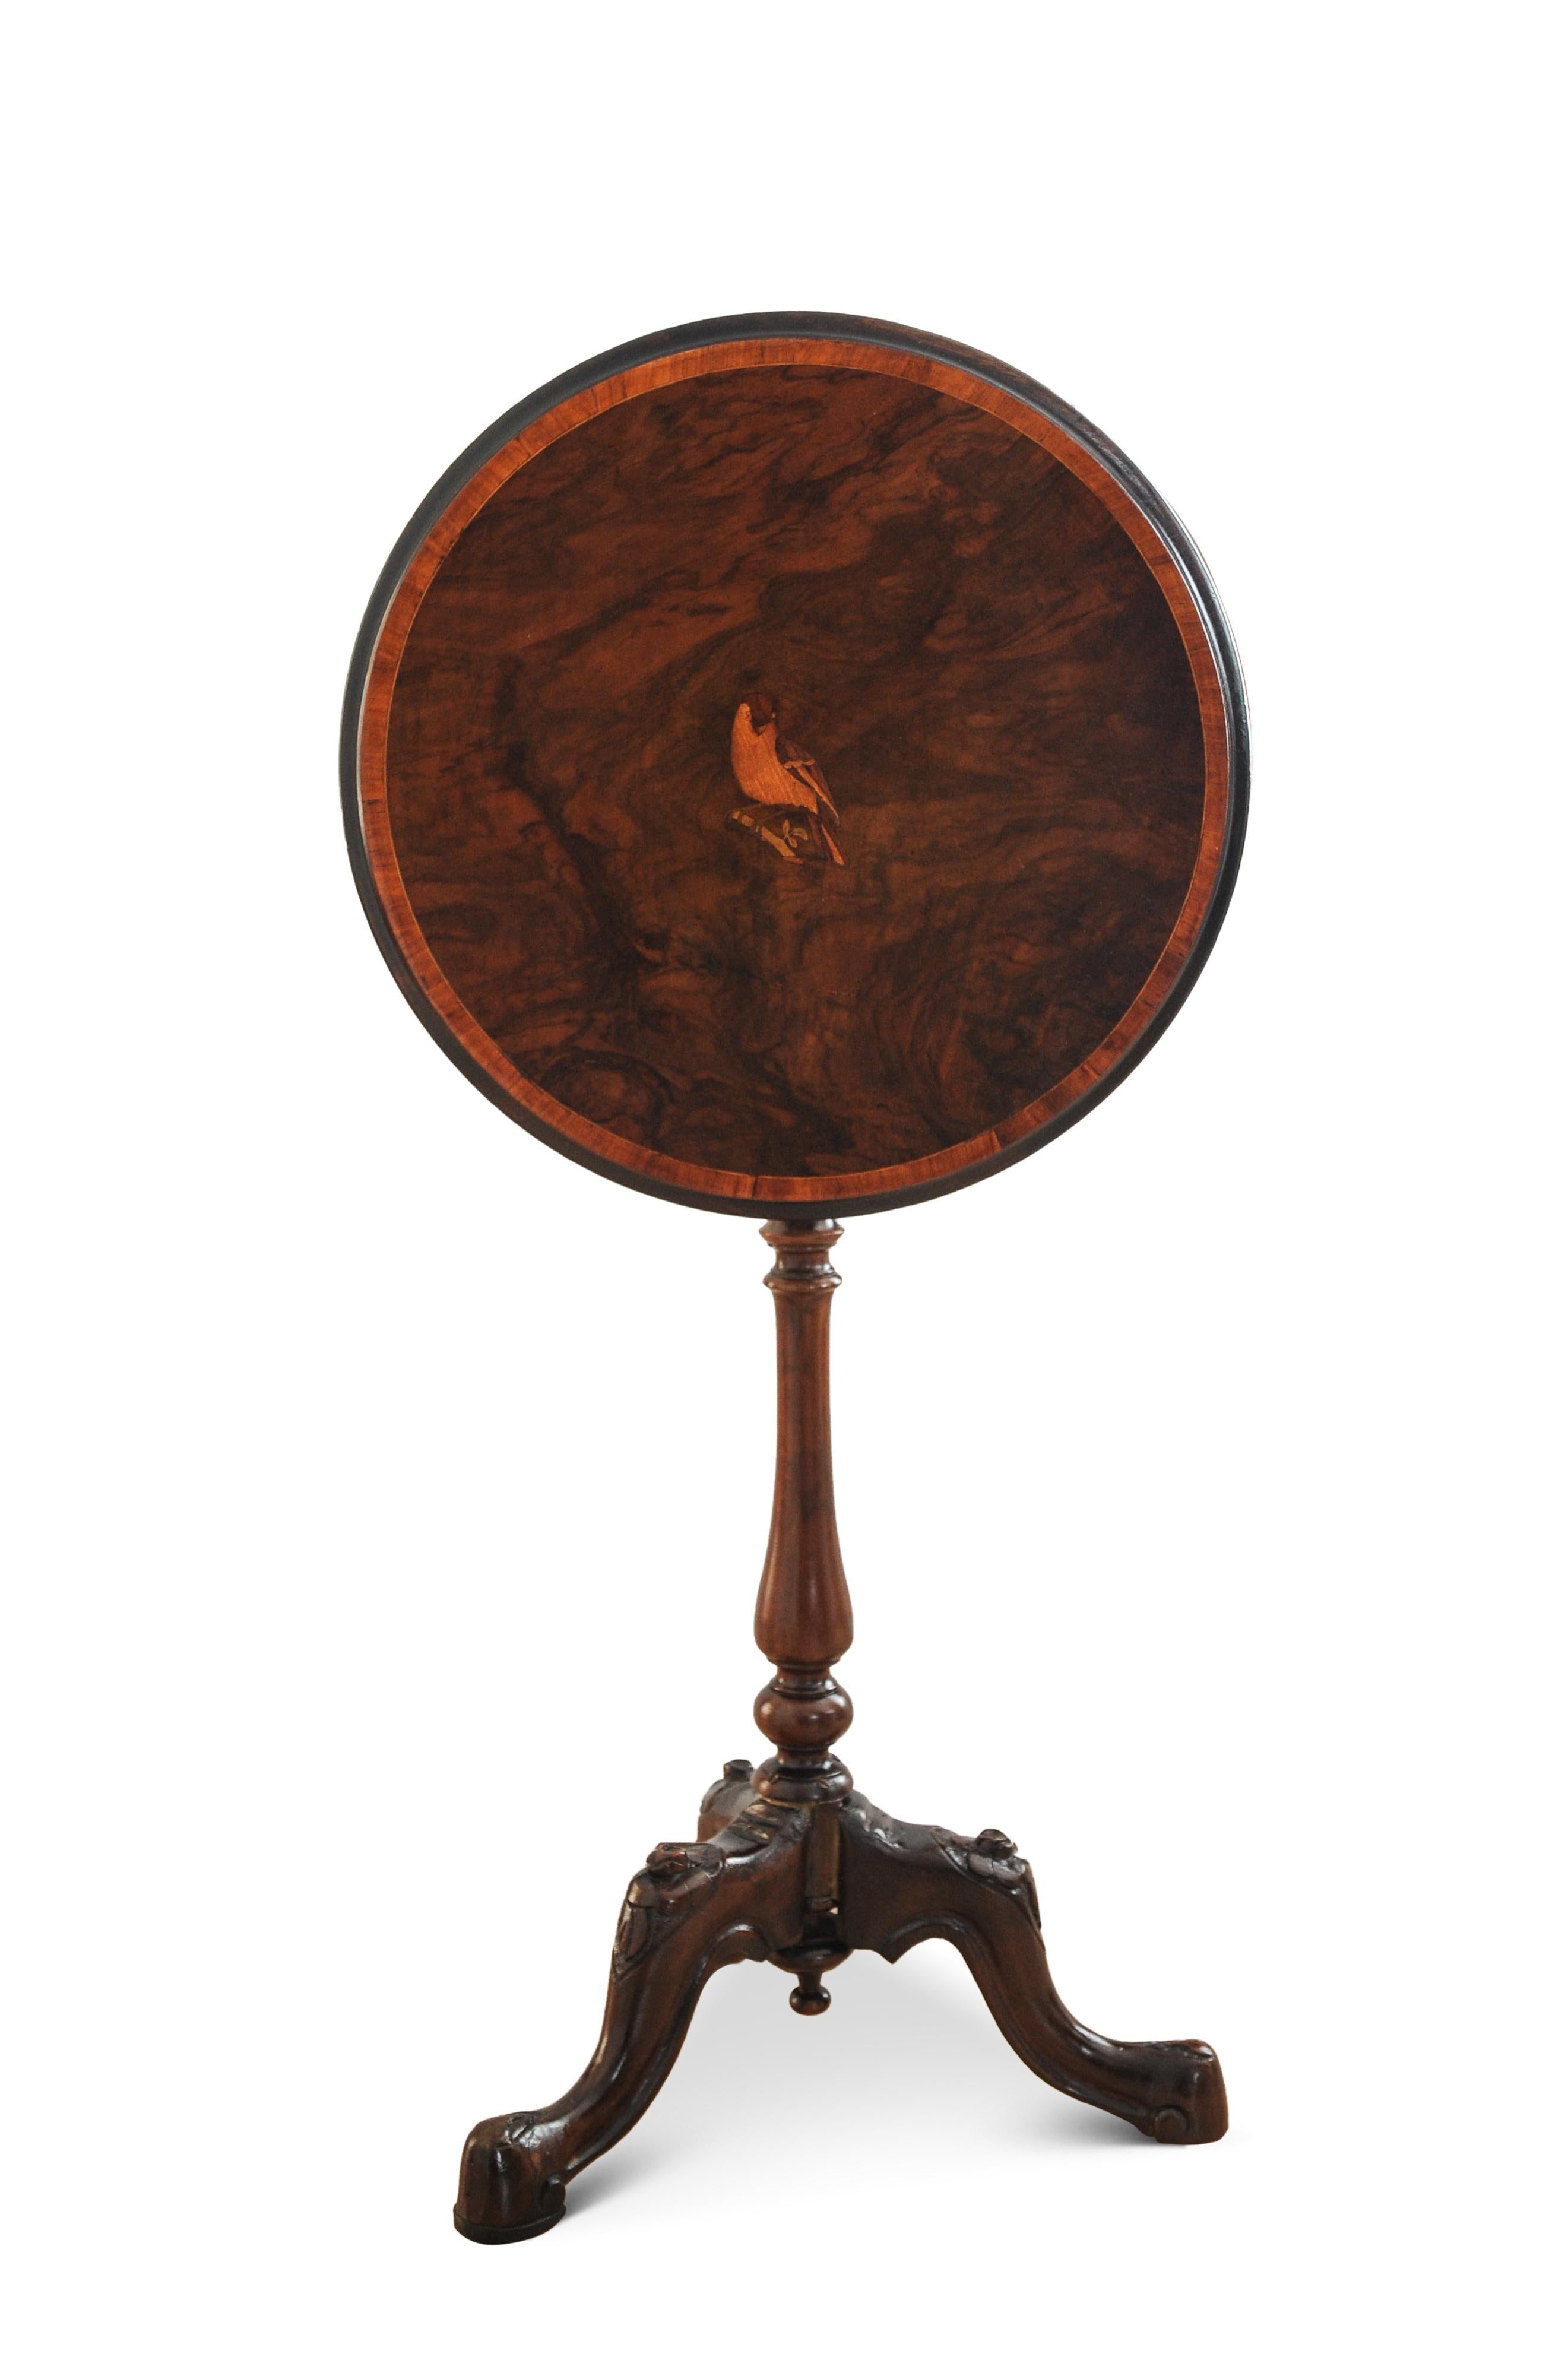 19th Century French Walnut Tilt Top Wine Table With A Central Inlaid Bird Motif  For Sale 1